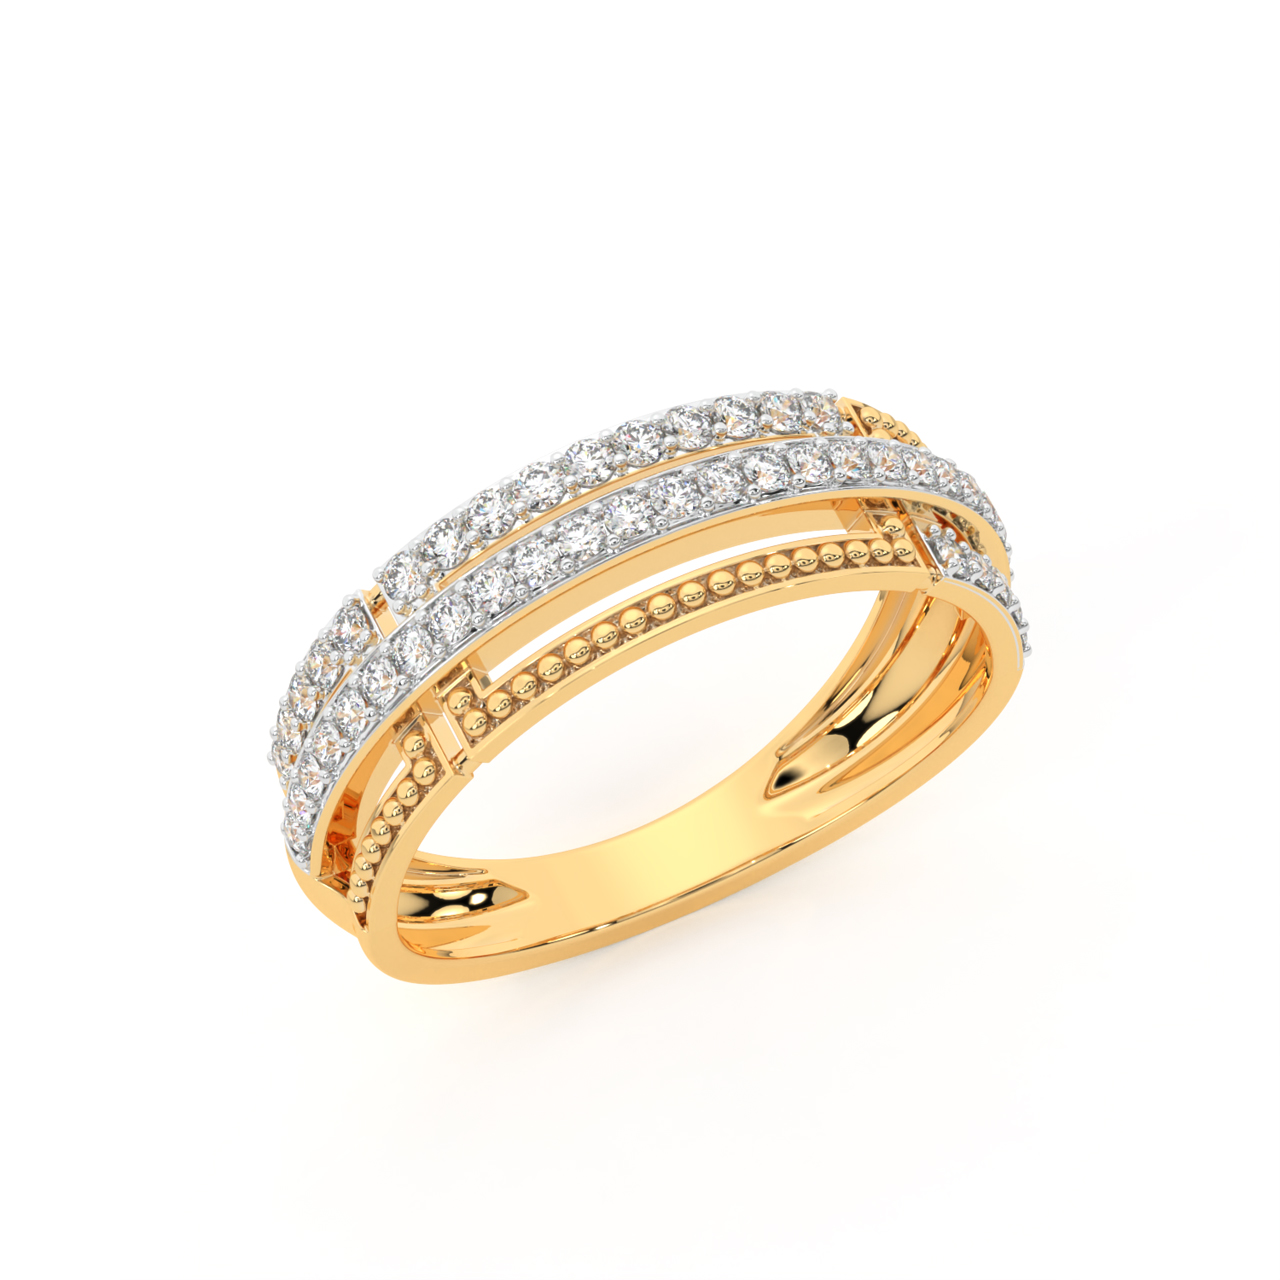 Huitan Modern Design Female Finger-ring with Bling CZ Stone Gold Color  Hollow Out Wide Rings Statement Jewelry for Women Gift